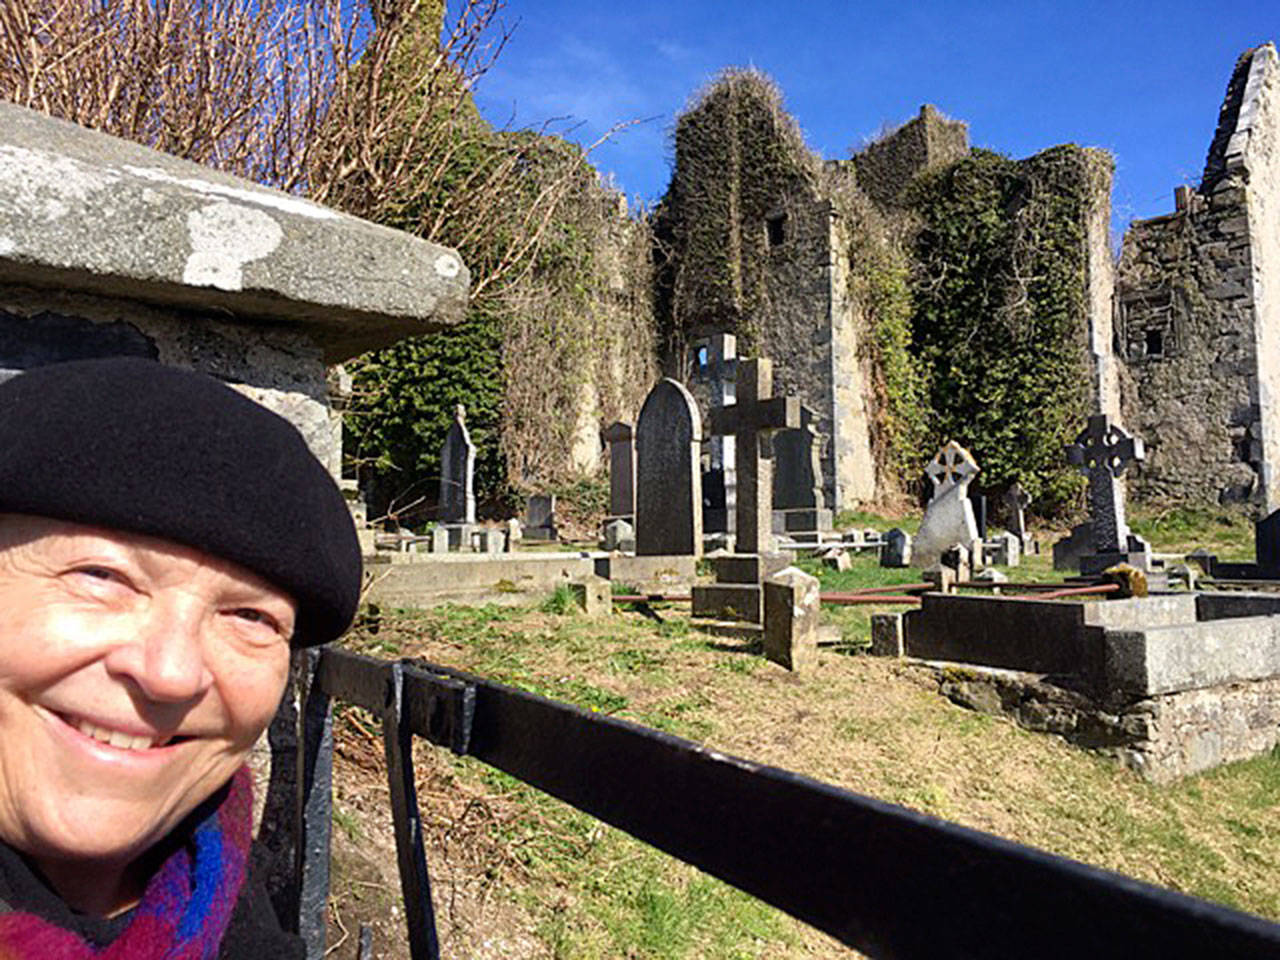 Kristi O’Donnell photo — In her last visit, Kristi O’Donnell went to her ancestor’s sites, including the O’Donnell Abbey ruins in Rathmullan, Ireland.